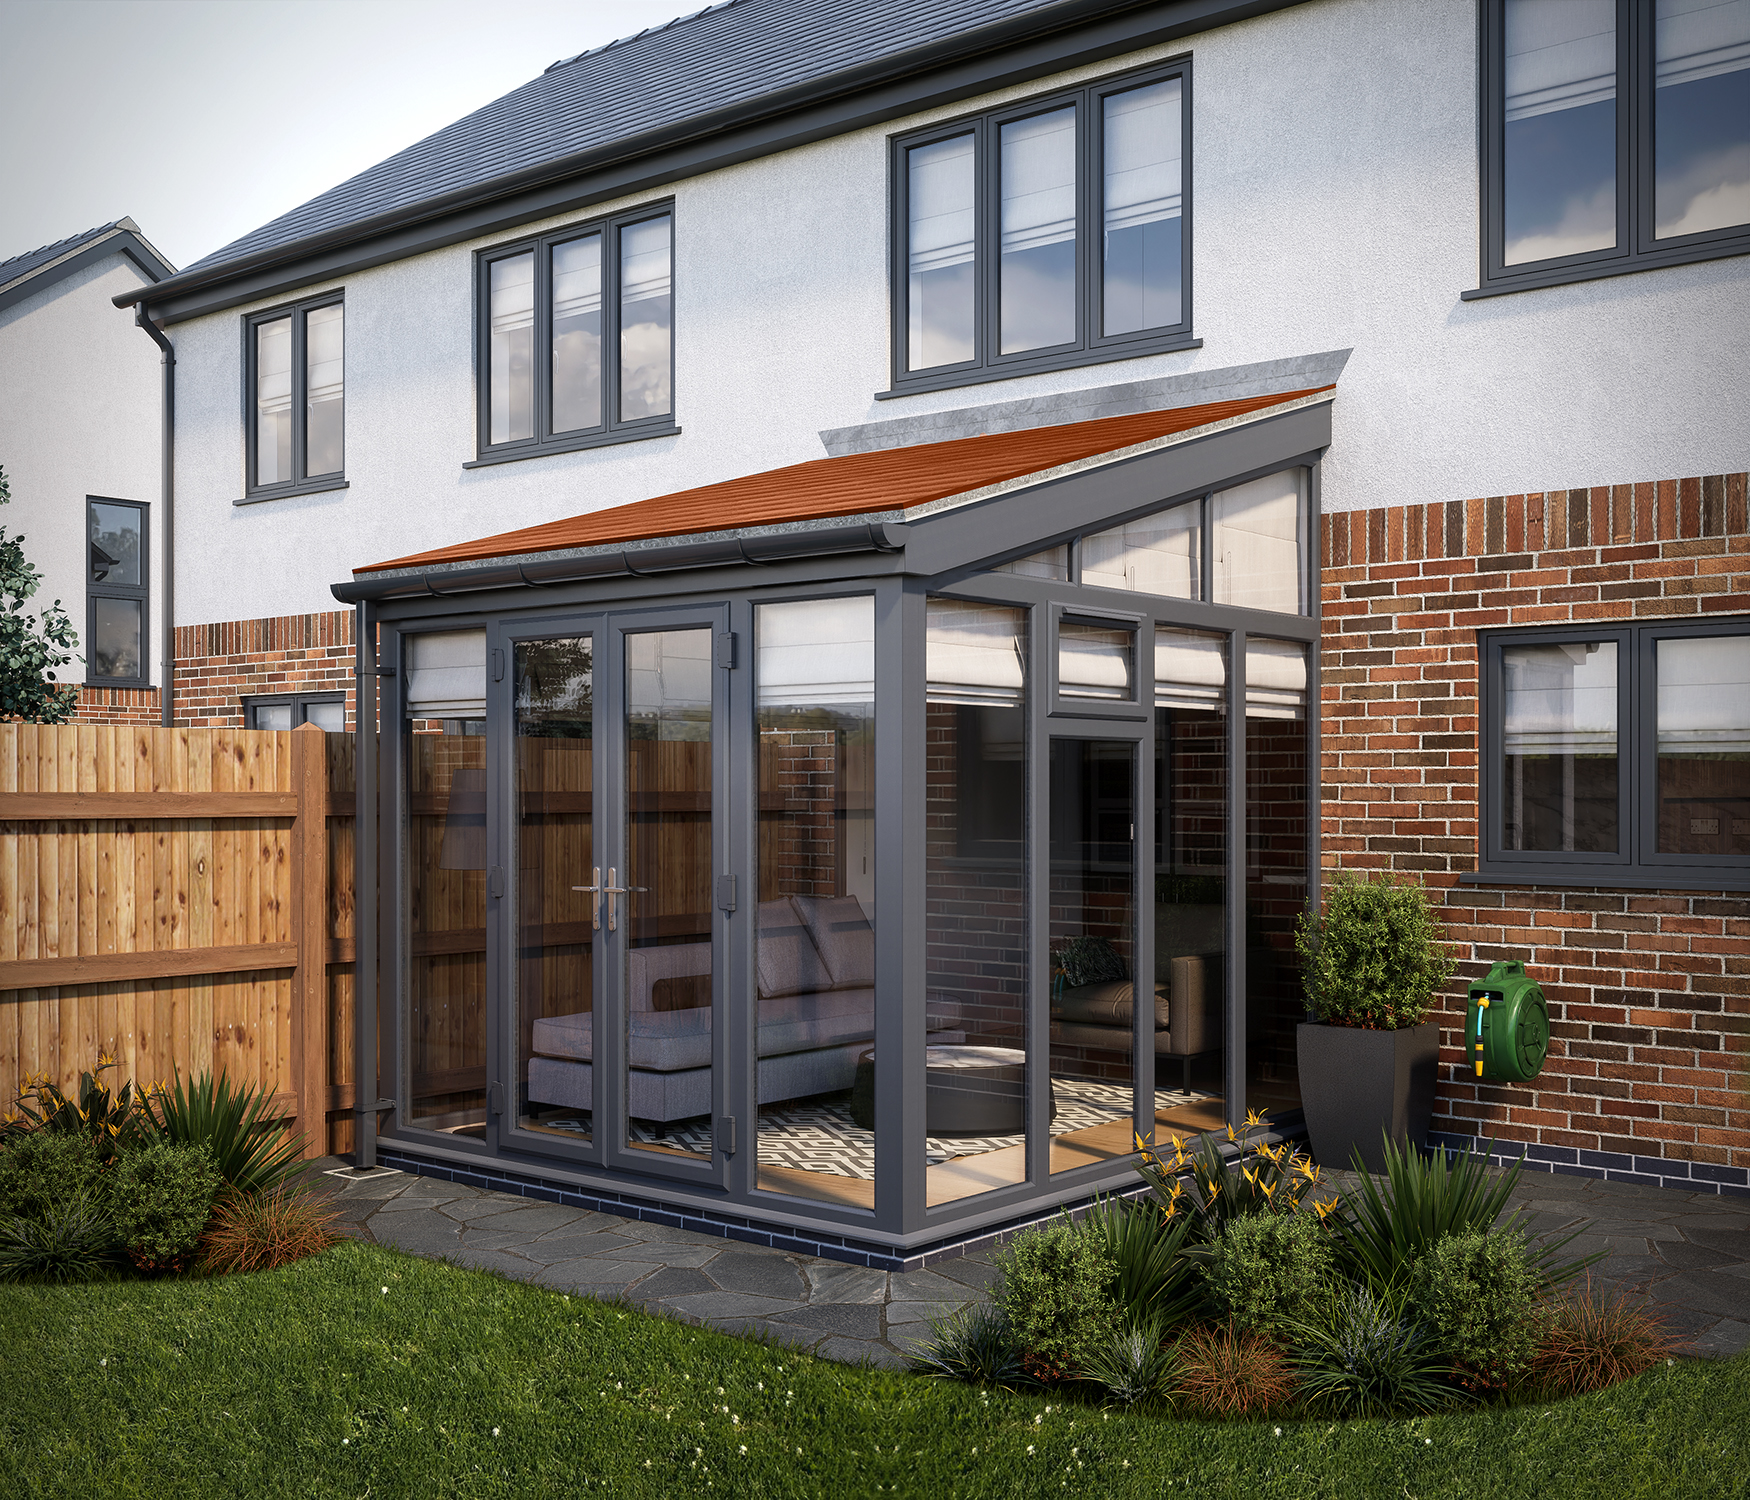 Image of SOLid Roof Full Height Lean to Conservatory Grey Frames with Rustic Terracotta Tiles - 13 x 10ft